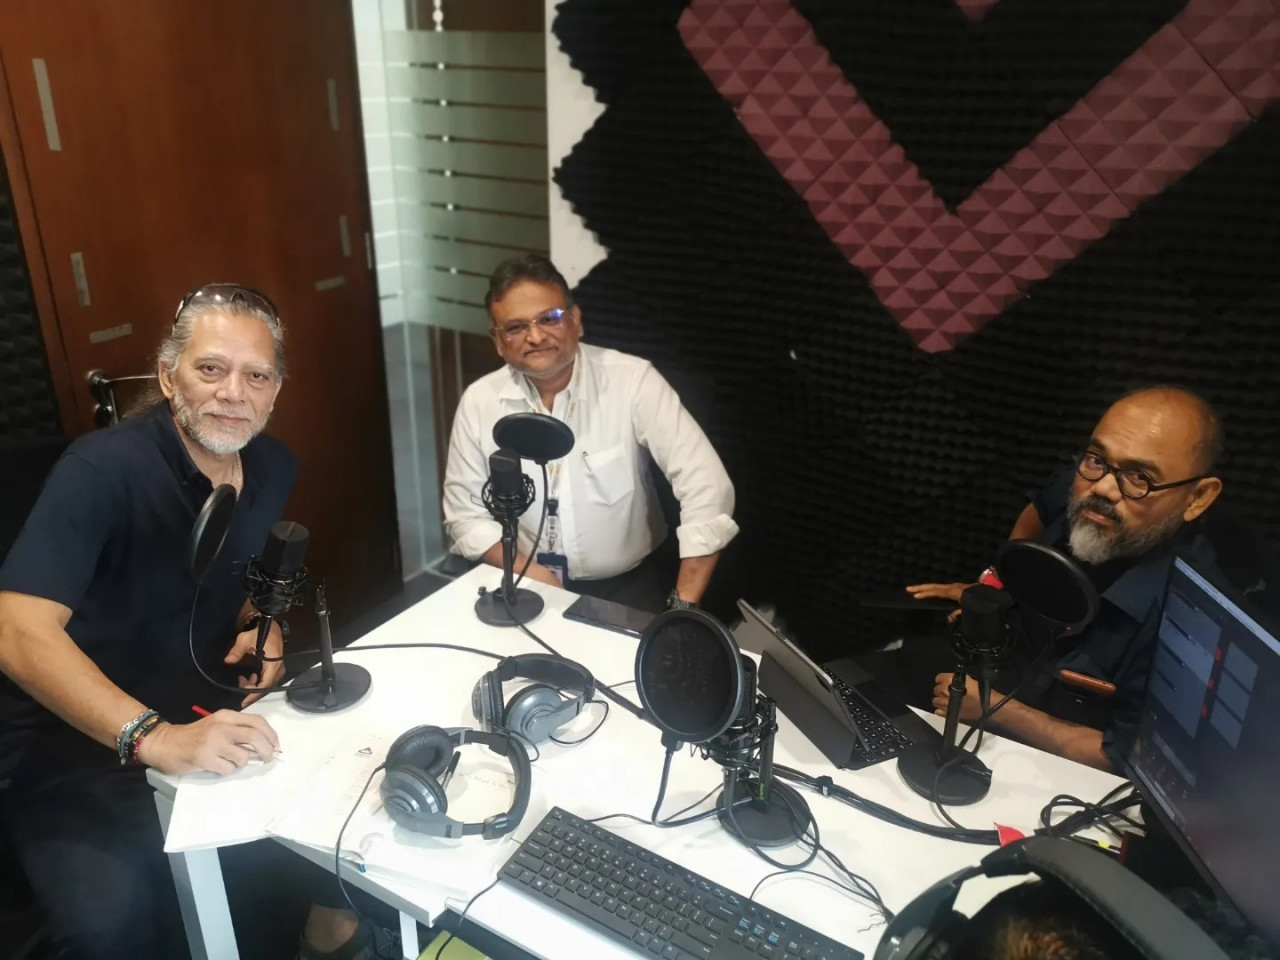 This episode discusses the apparent trend of politicians challenging each other to public debates, such as the upcoming one called on by opposition leader Datuk Seri Anwar Ibrahim against Datuk Seri Najib Razak over financially troubled oil and gas firm Sapura Energy Bhd. – SHAZMIN SHAMSUDDIN/The Vibes pic, April 30, 2022